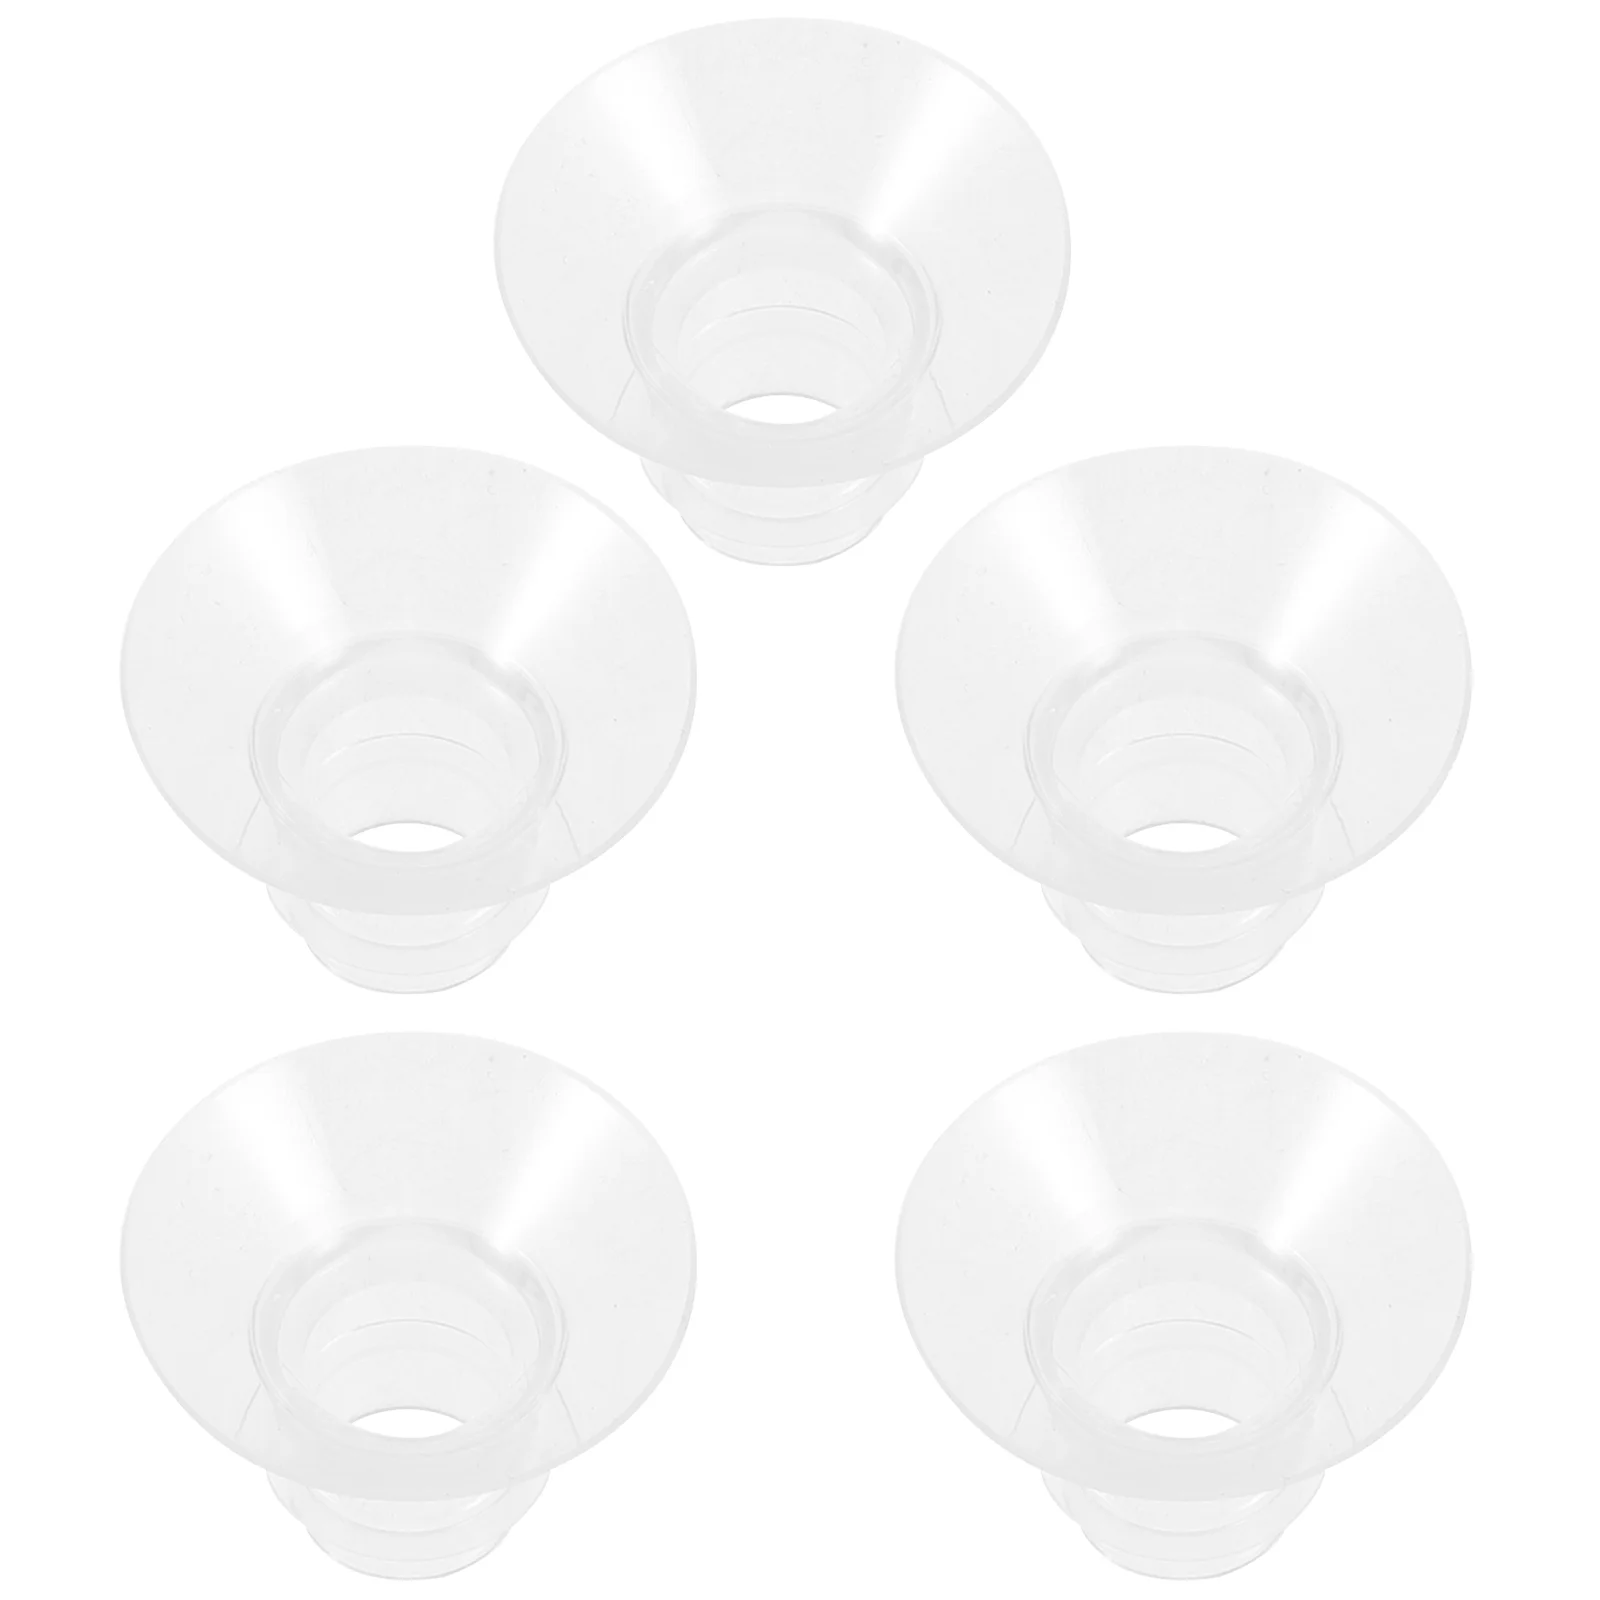 

Replacement Mom Cozy Breast Pumps Parts 19mm Flange Insert Inserts Silicone Accessories Universal